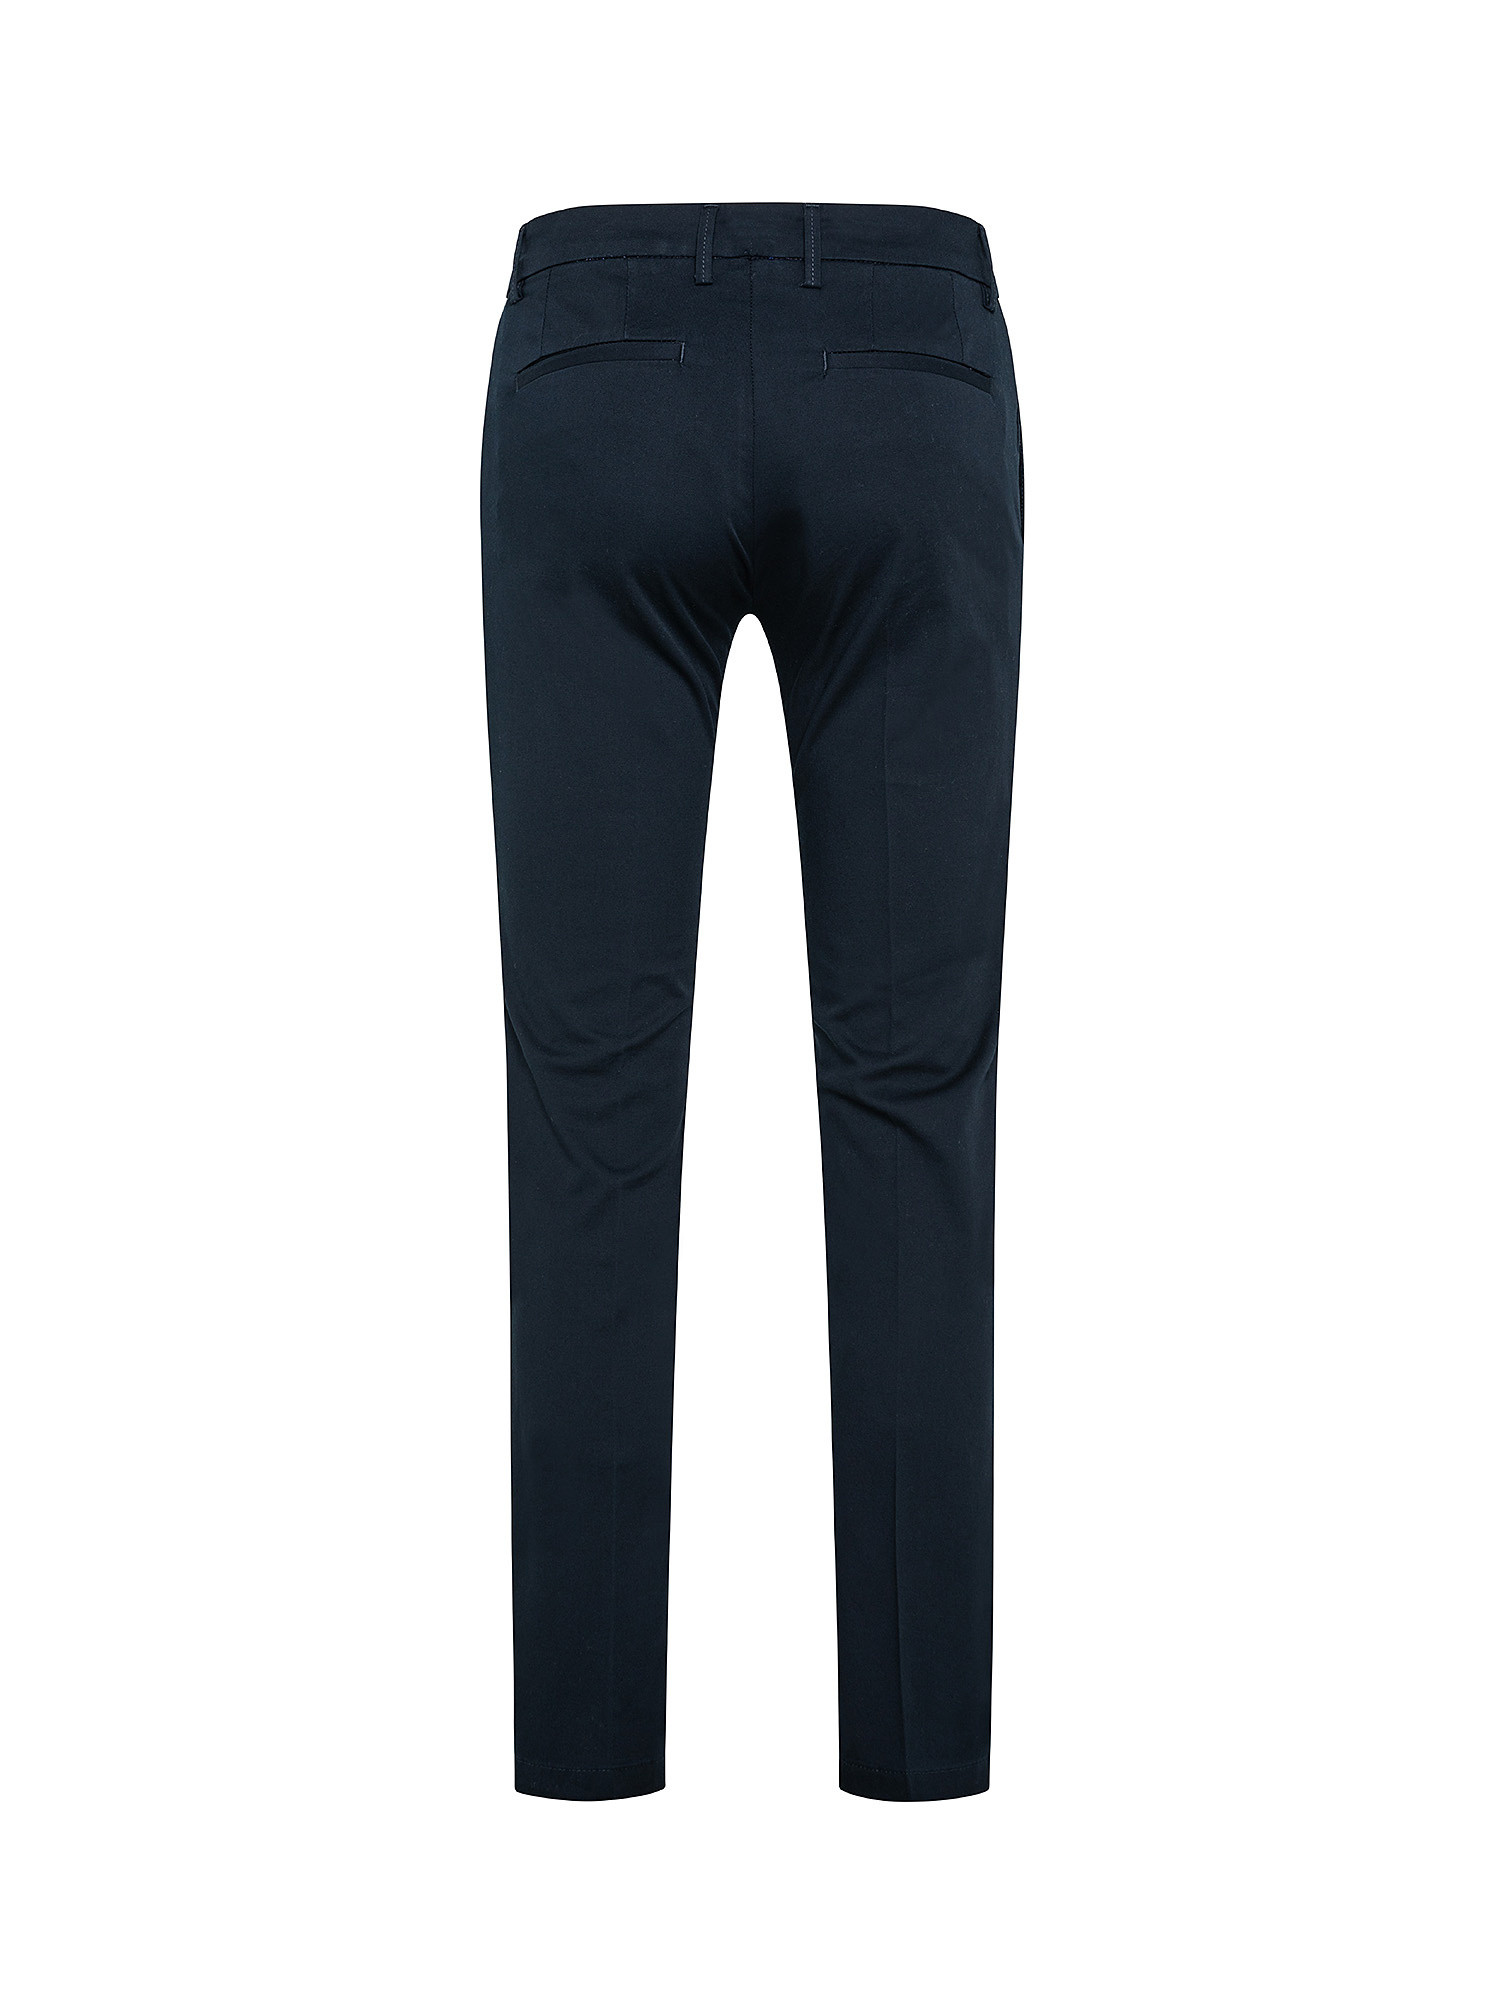 Chino trousers, Blue, large image number 1